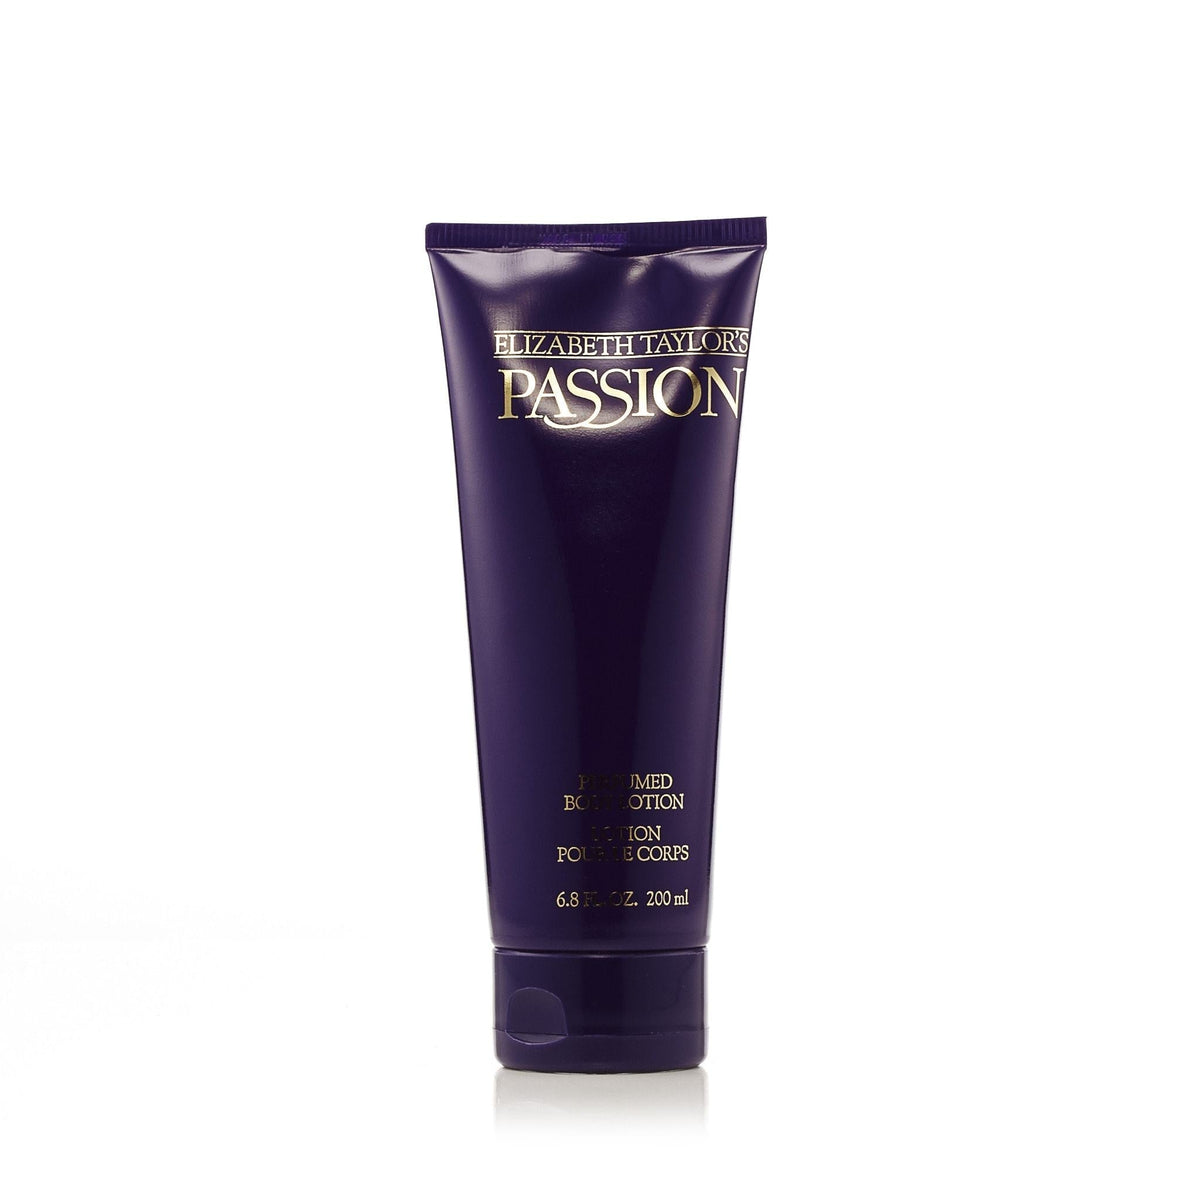 Passion Body Lotion for Women by Elizabeth Taylor 6.8 oz.